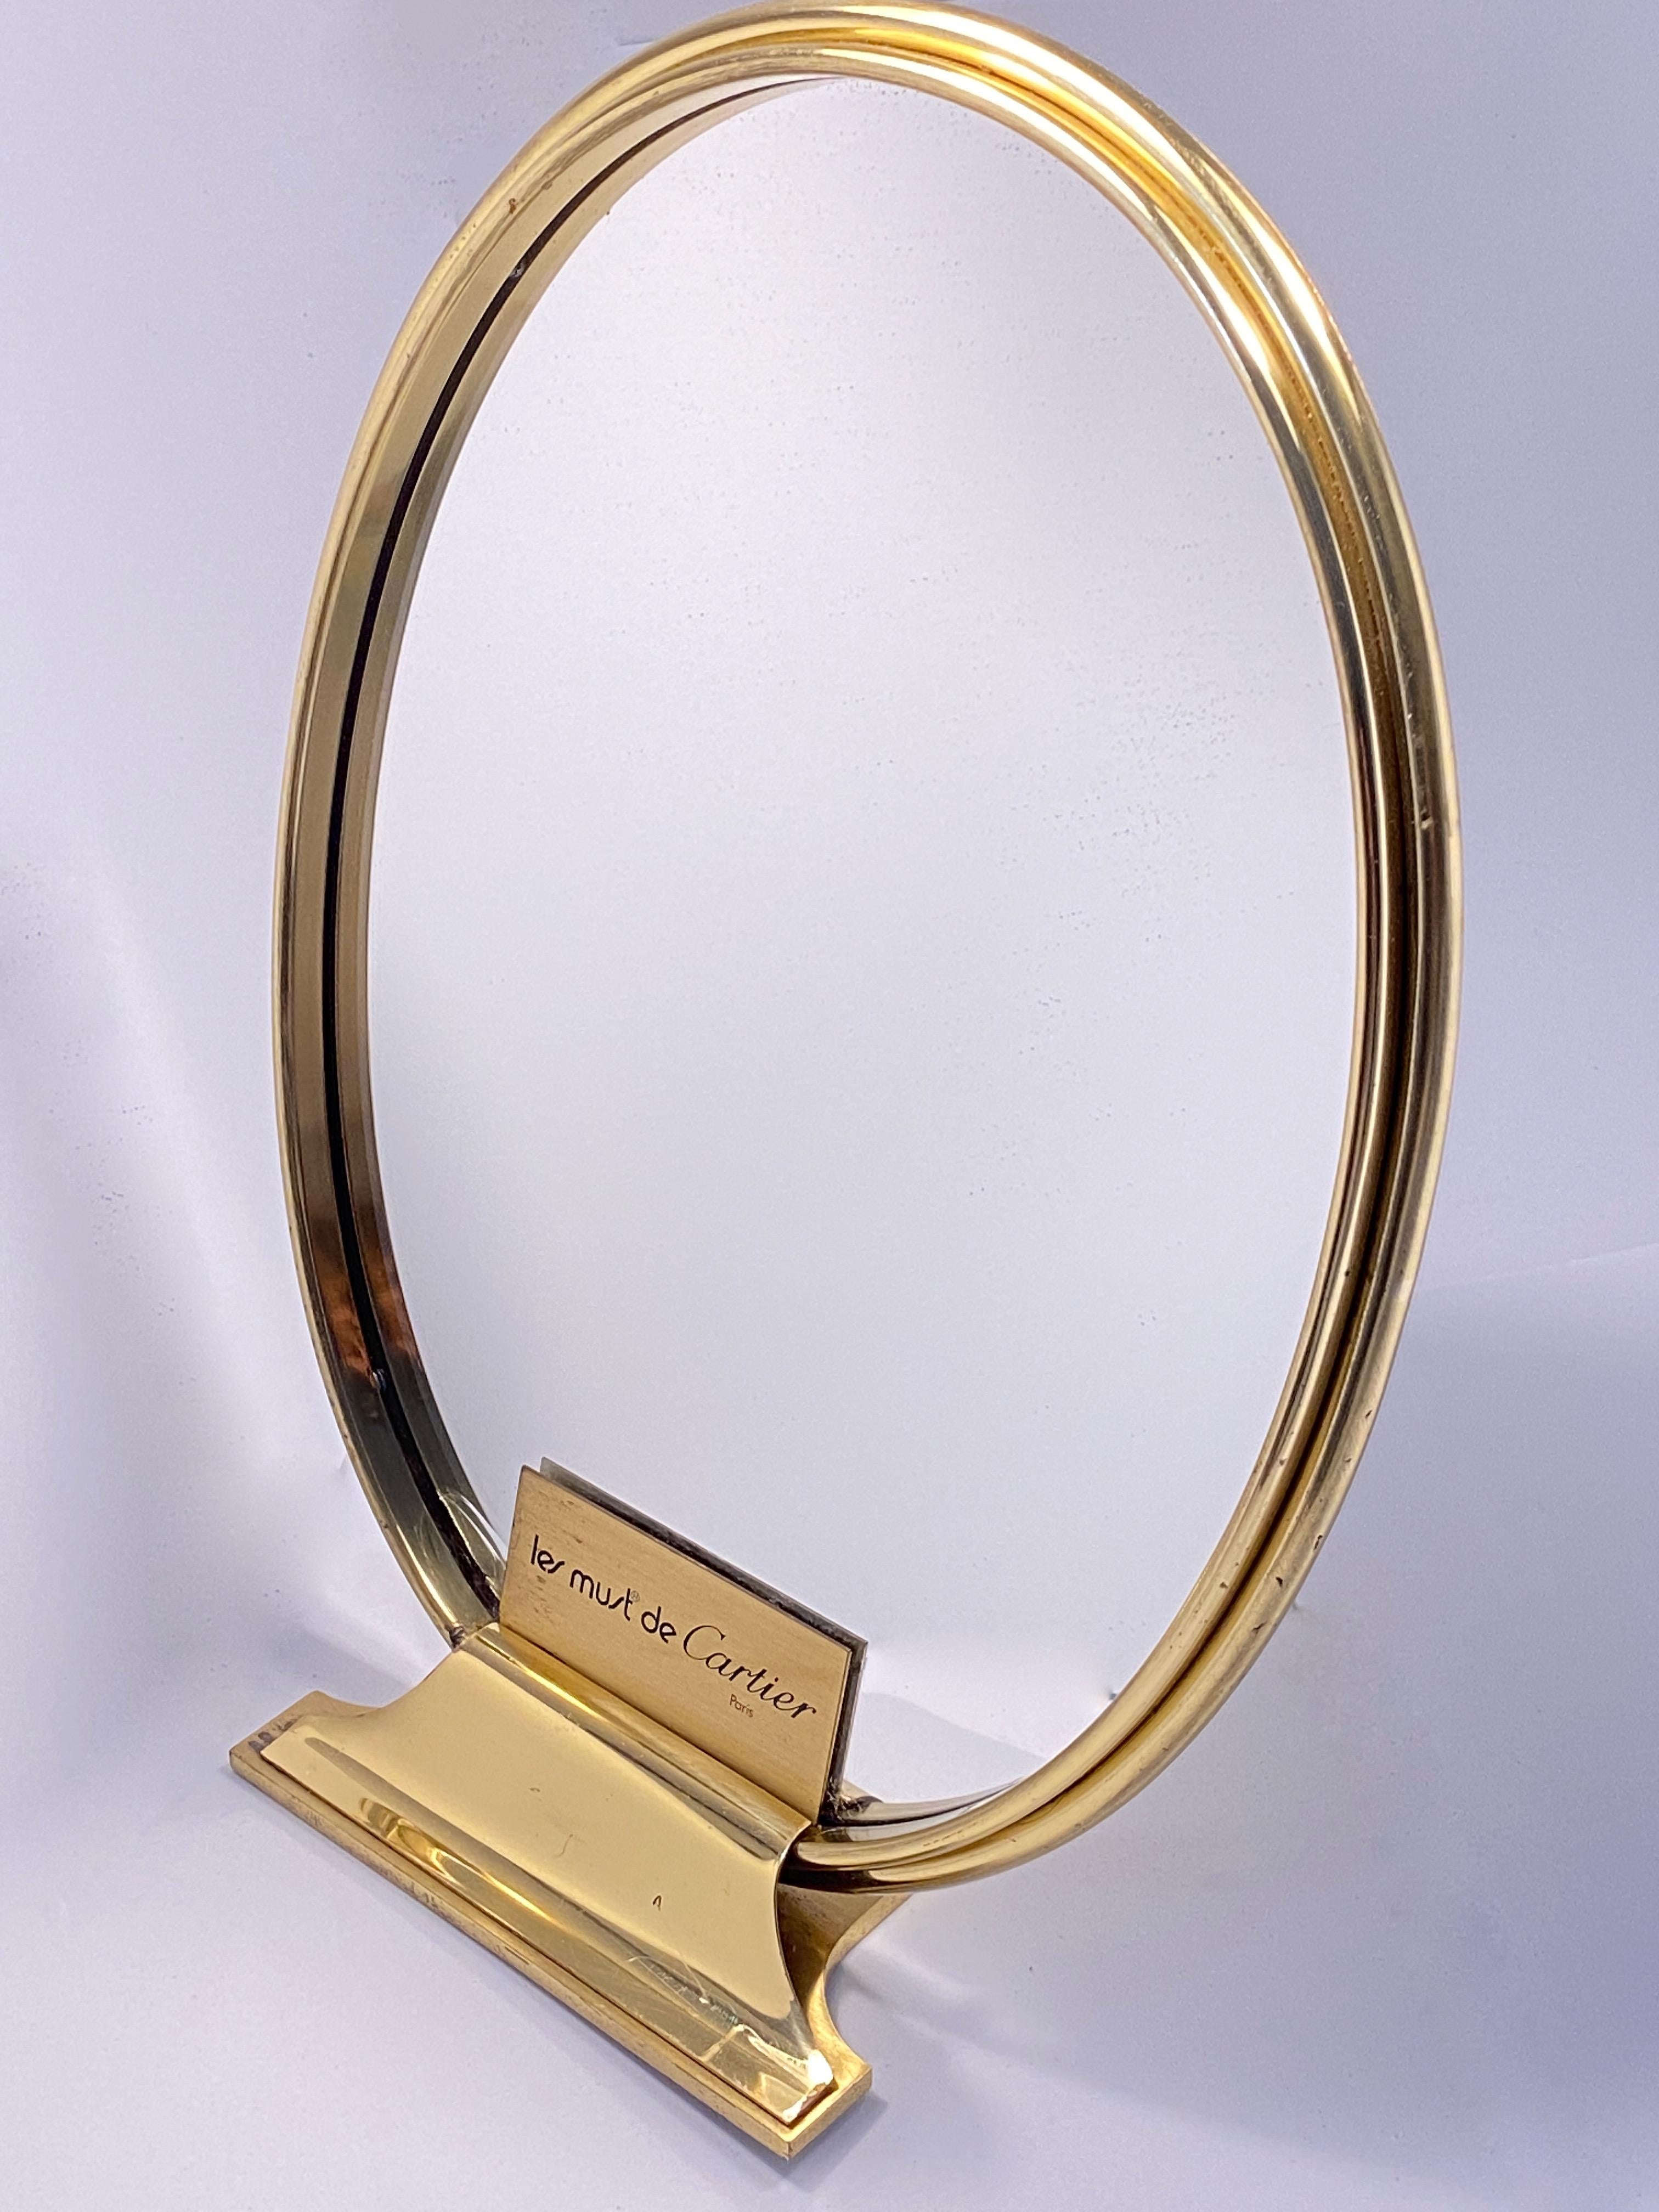 Cartier Mirrors - 5 For Sale at 1stDibs